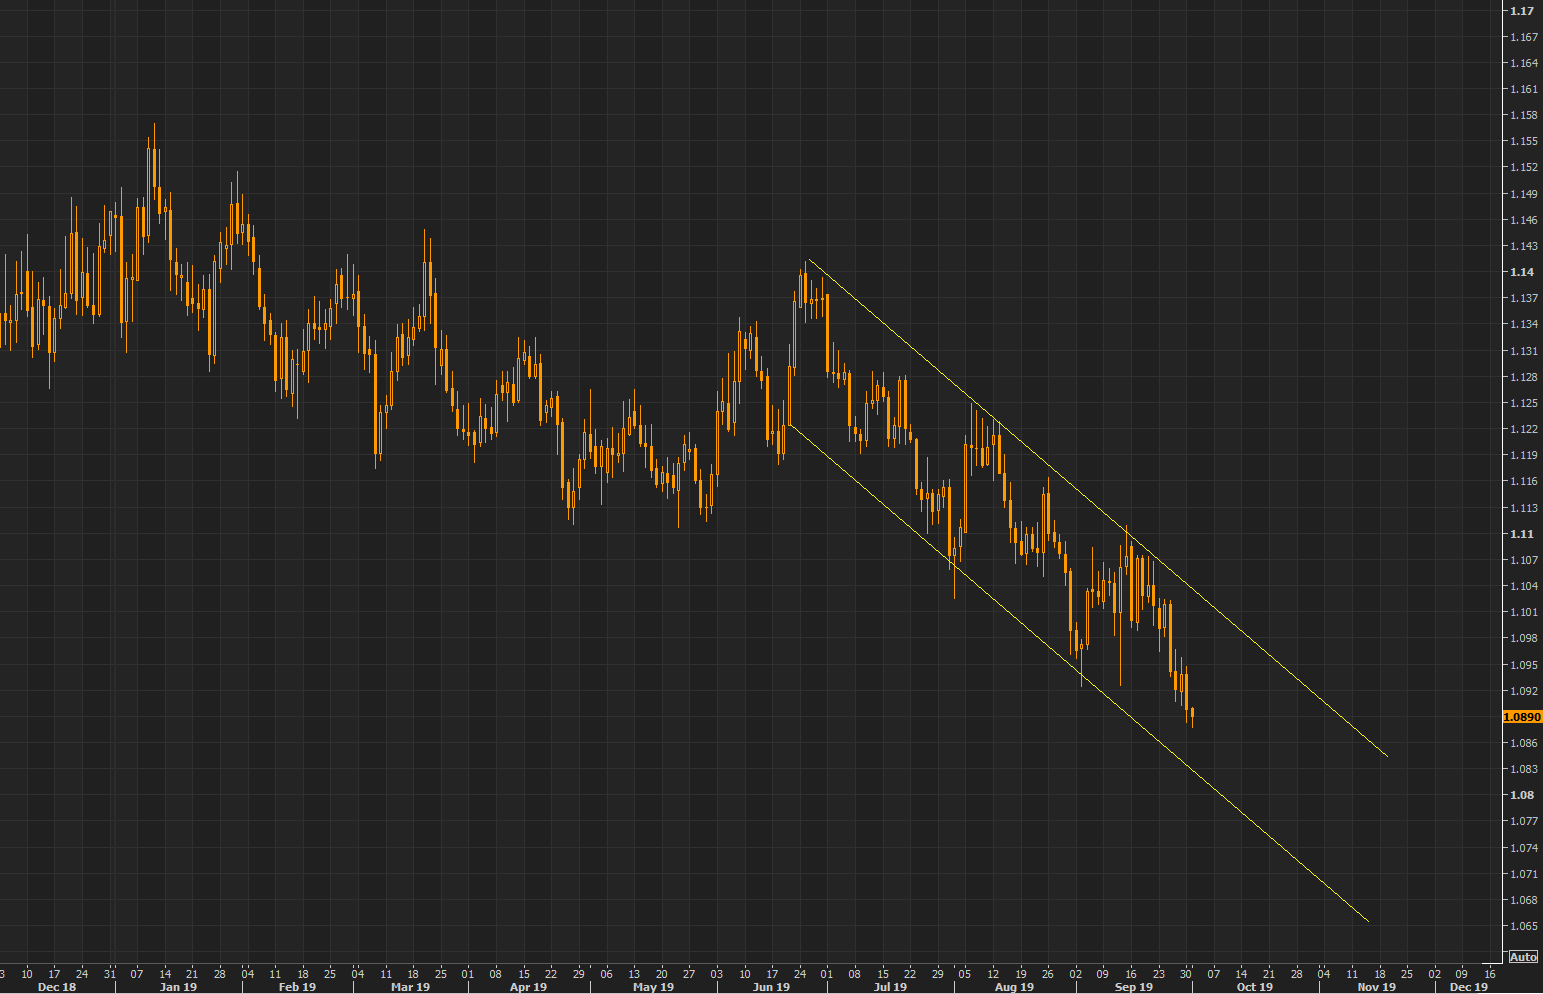 Euro continues the perfect channel down, watch the big 1.09 level here